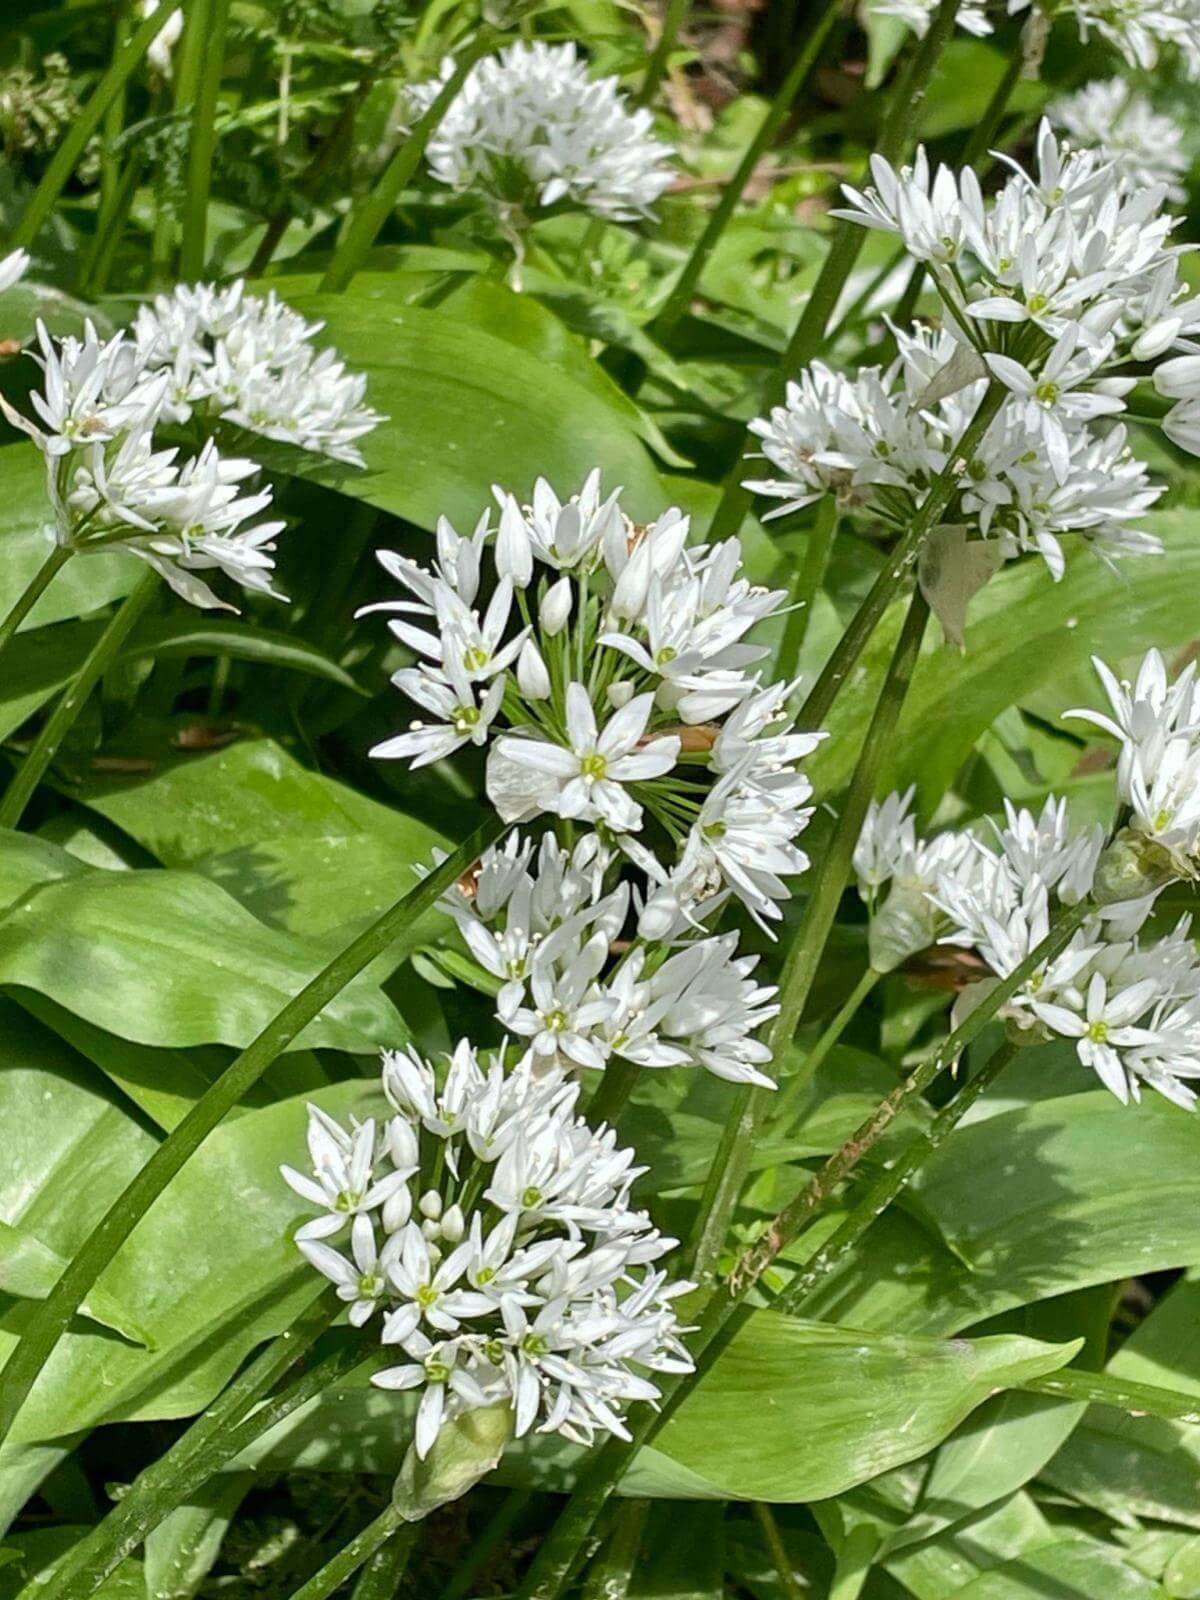 Wild garlic growing with flowers.